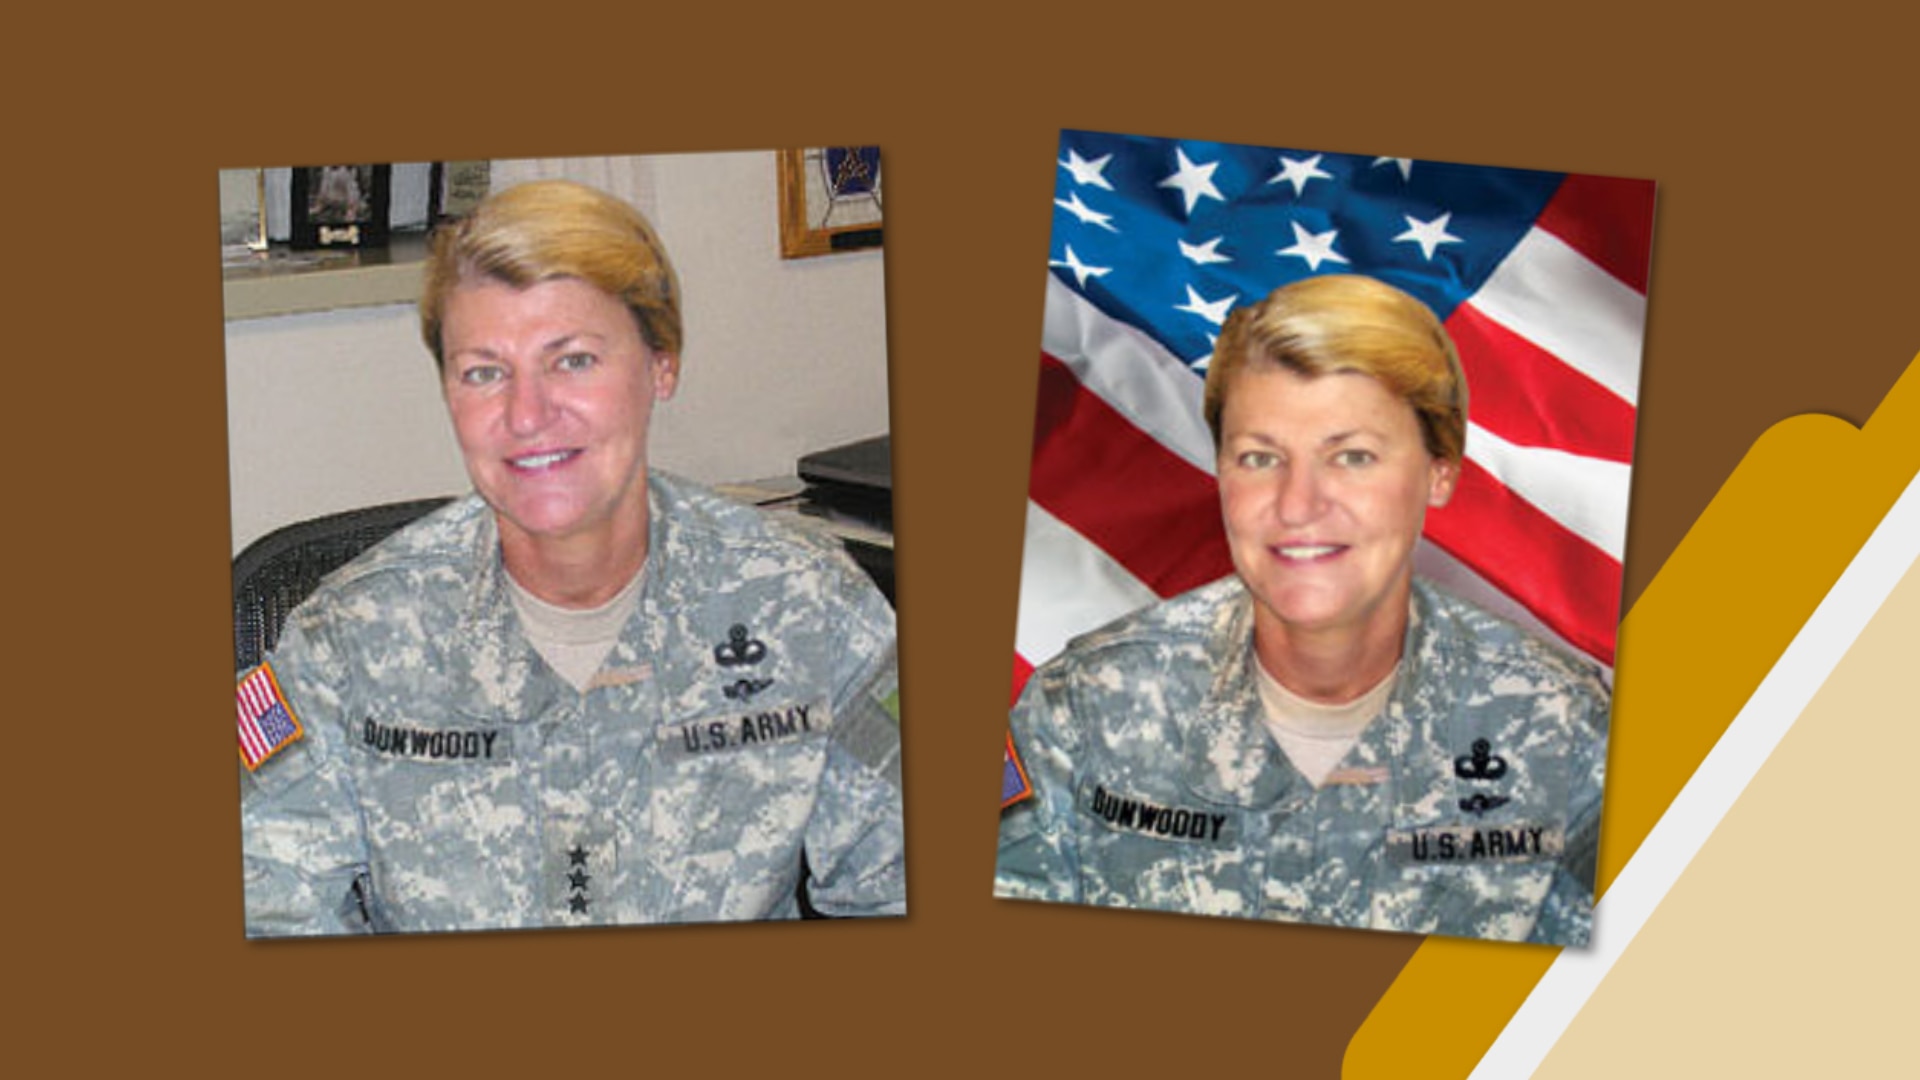 side-by-side photos of a military woman with an office background and the same image badly altered by including the American flag.